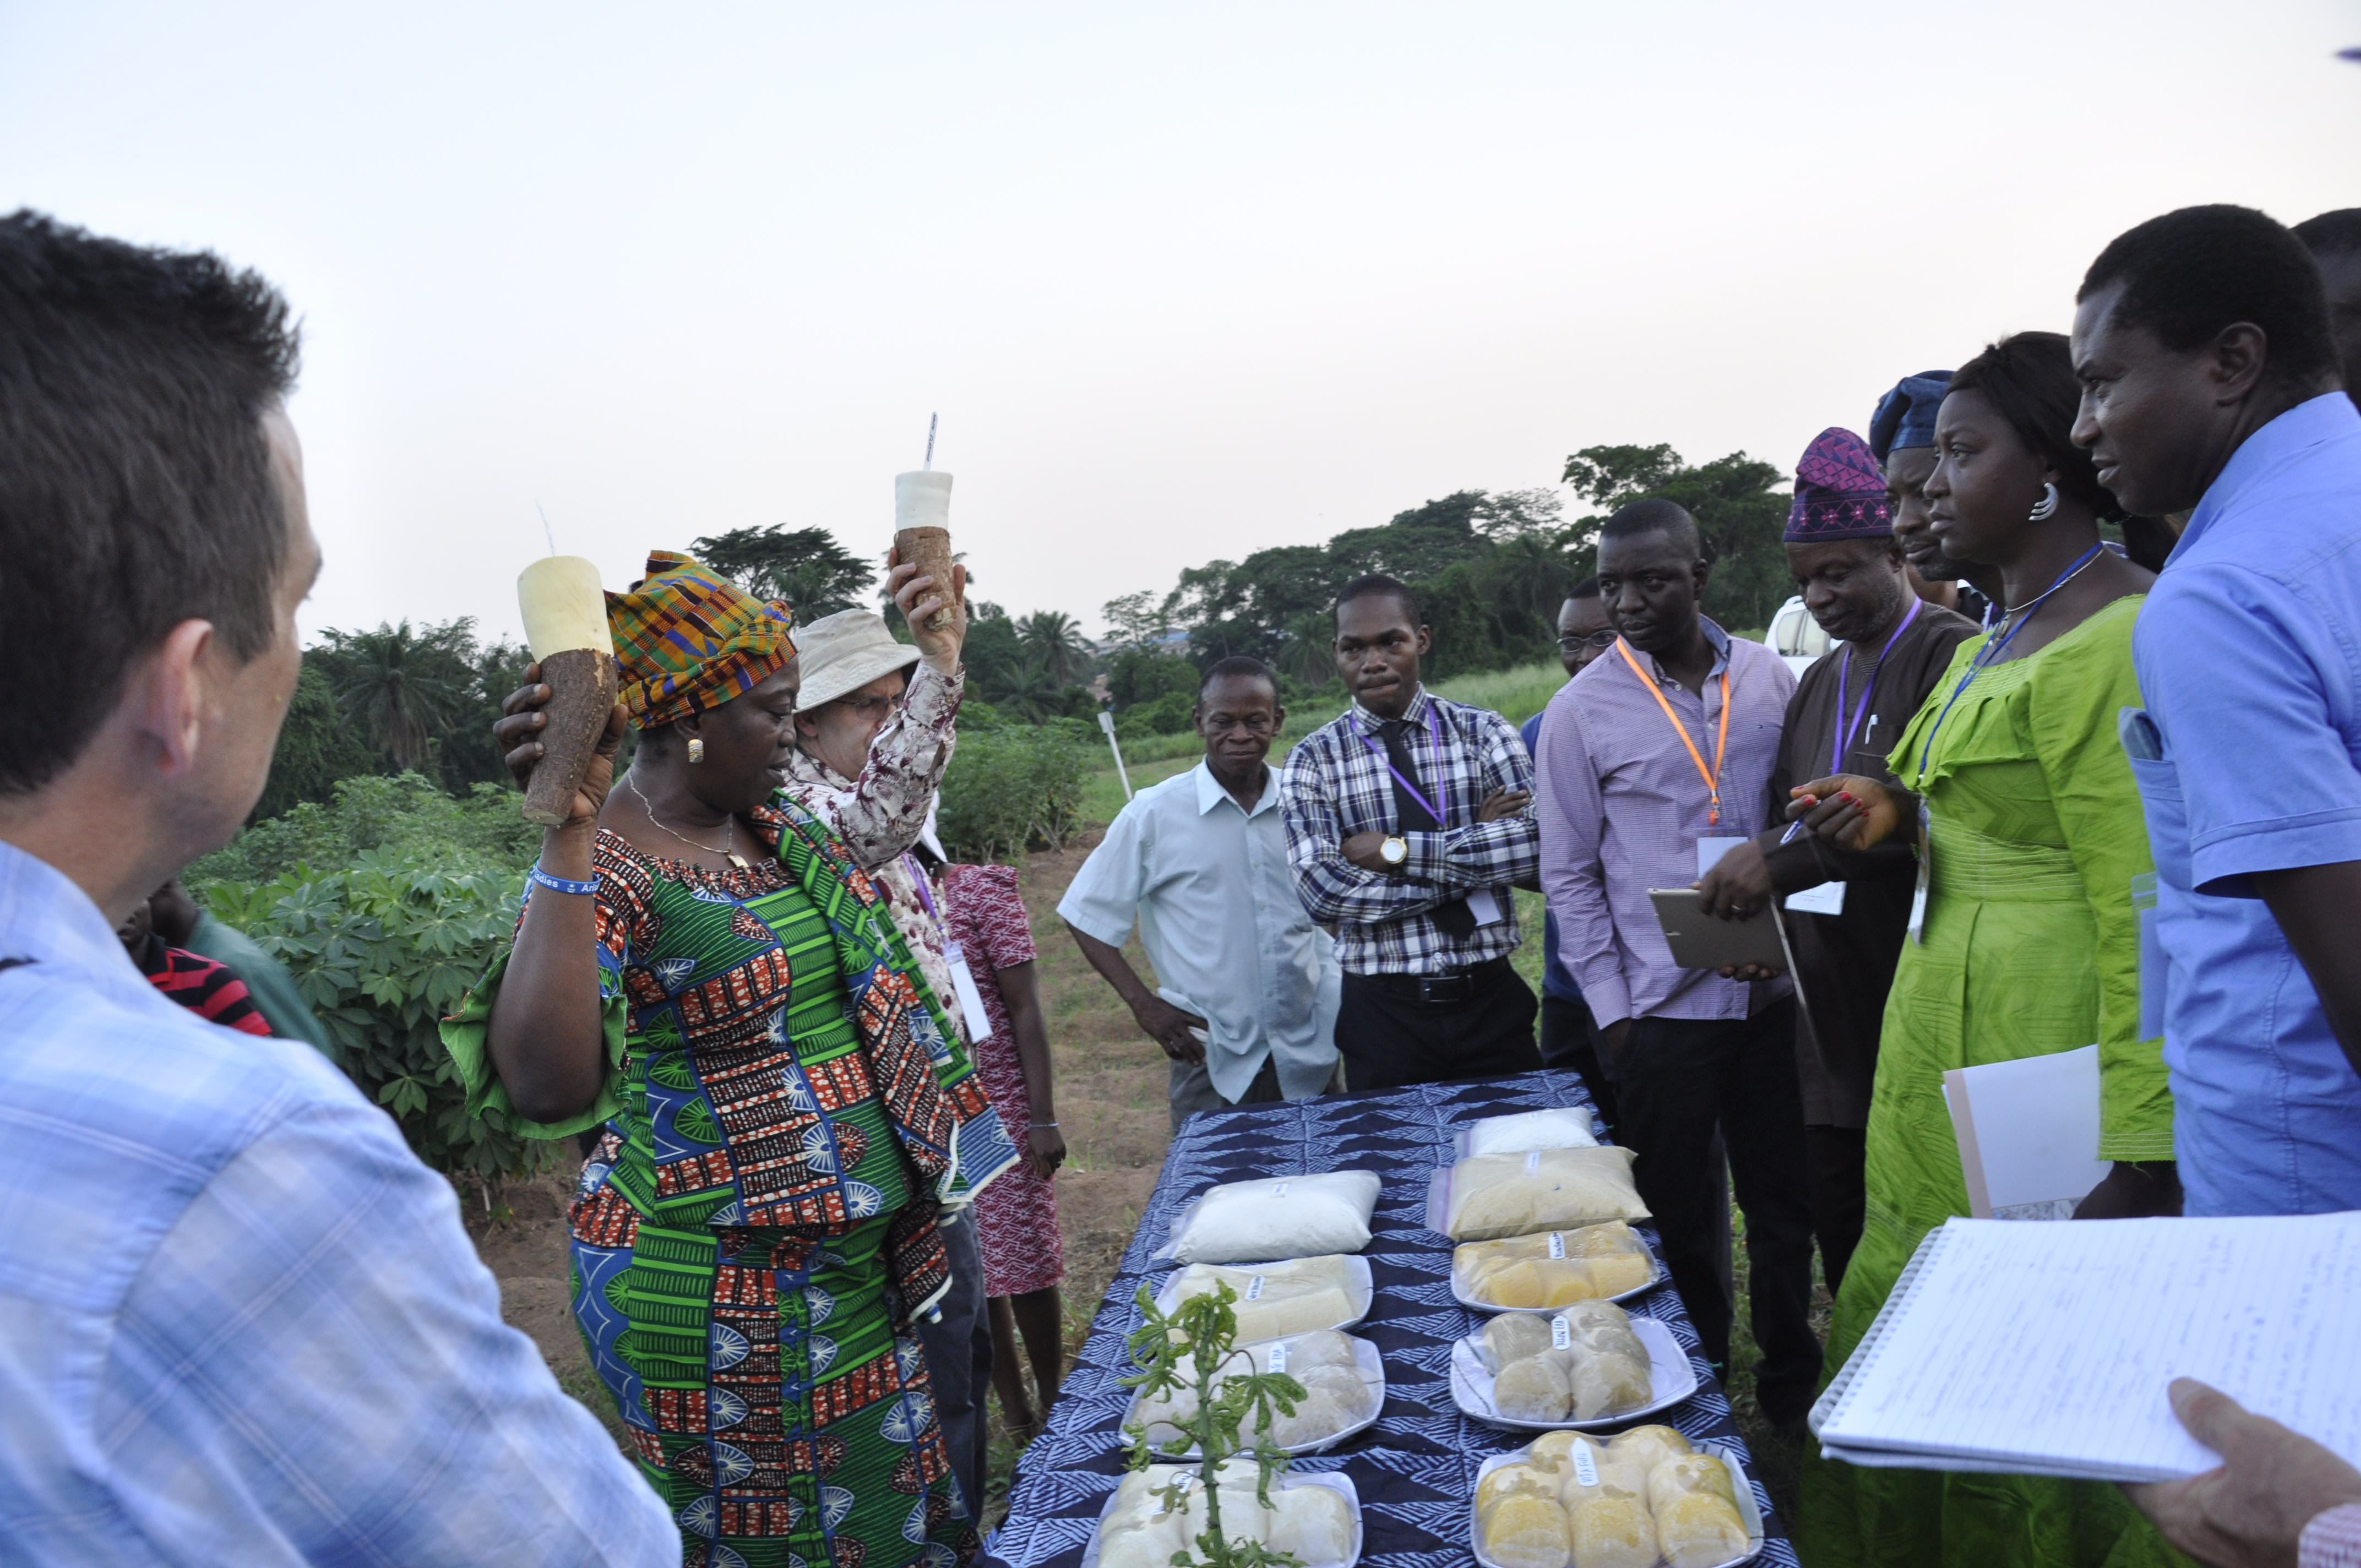 Dr Elizabeth Parkes and Dr Peter Kulakow show a range of finished products from both the white and yellow-fleshed cassava varieties to workshop participants during a field tour.